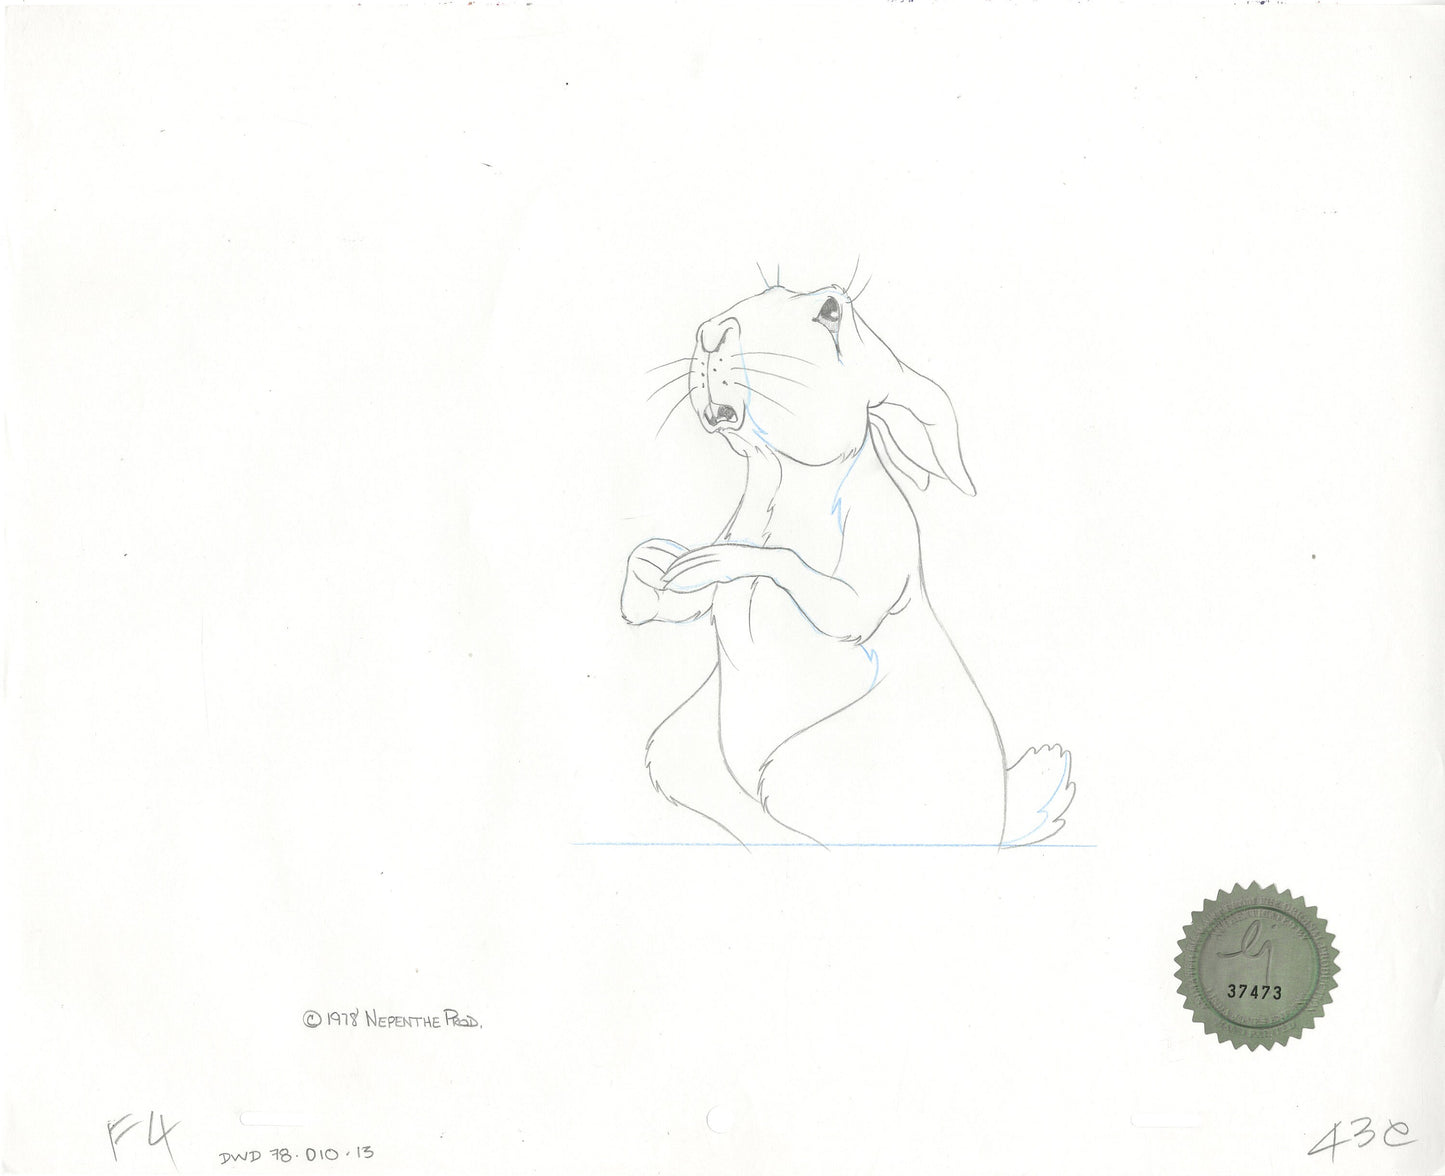 Watership Down 1978 Production Animation Cel Drawing of Cowslip with Linda Jones Enterprise Seal and Certificate of Authenticity 010-013